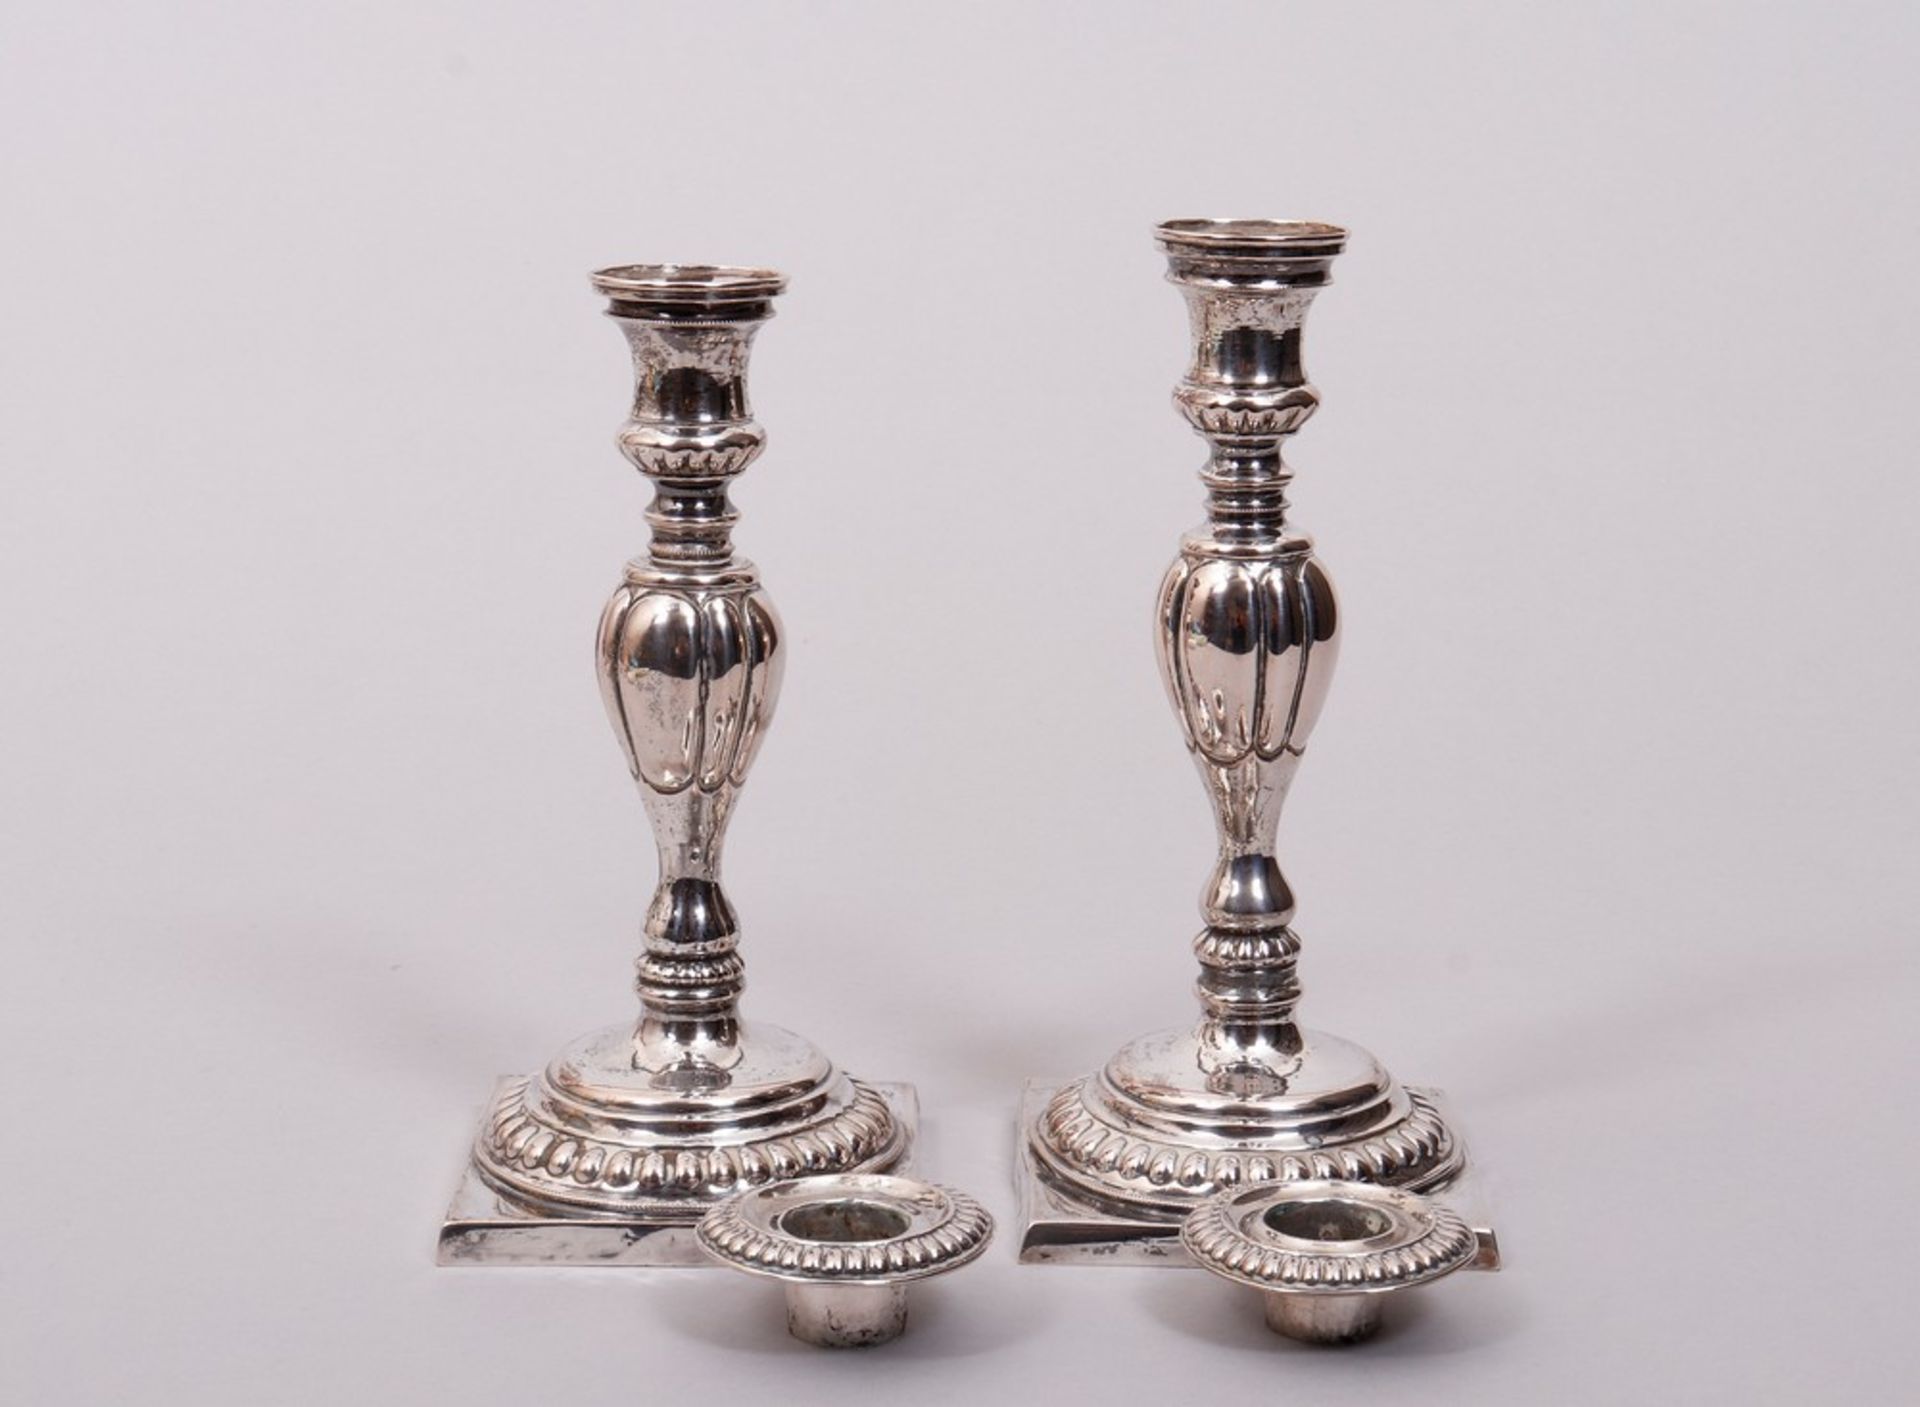 Pair of table candlesticks, silver, Berlin, 1st half 19th C. - Image 3 of 4